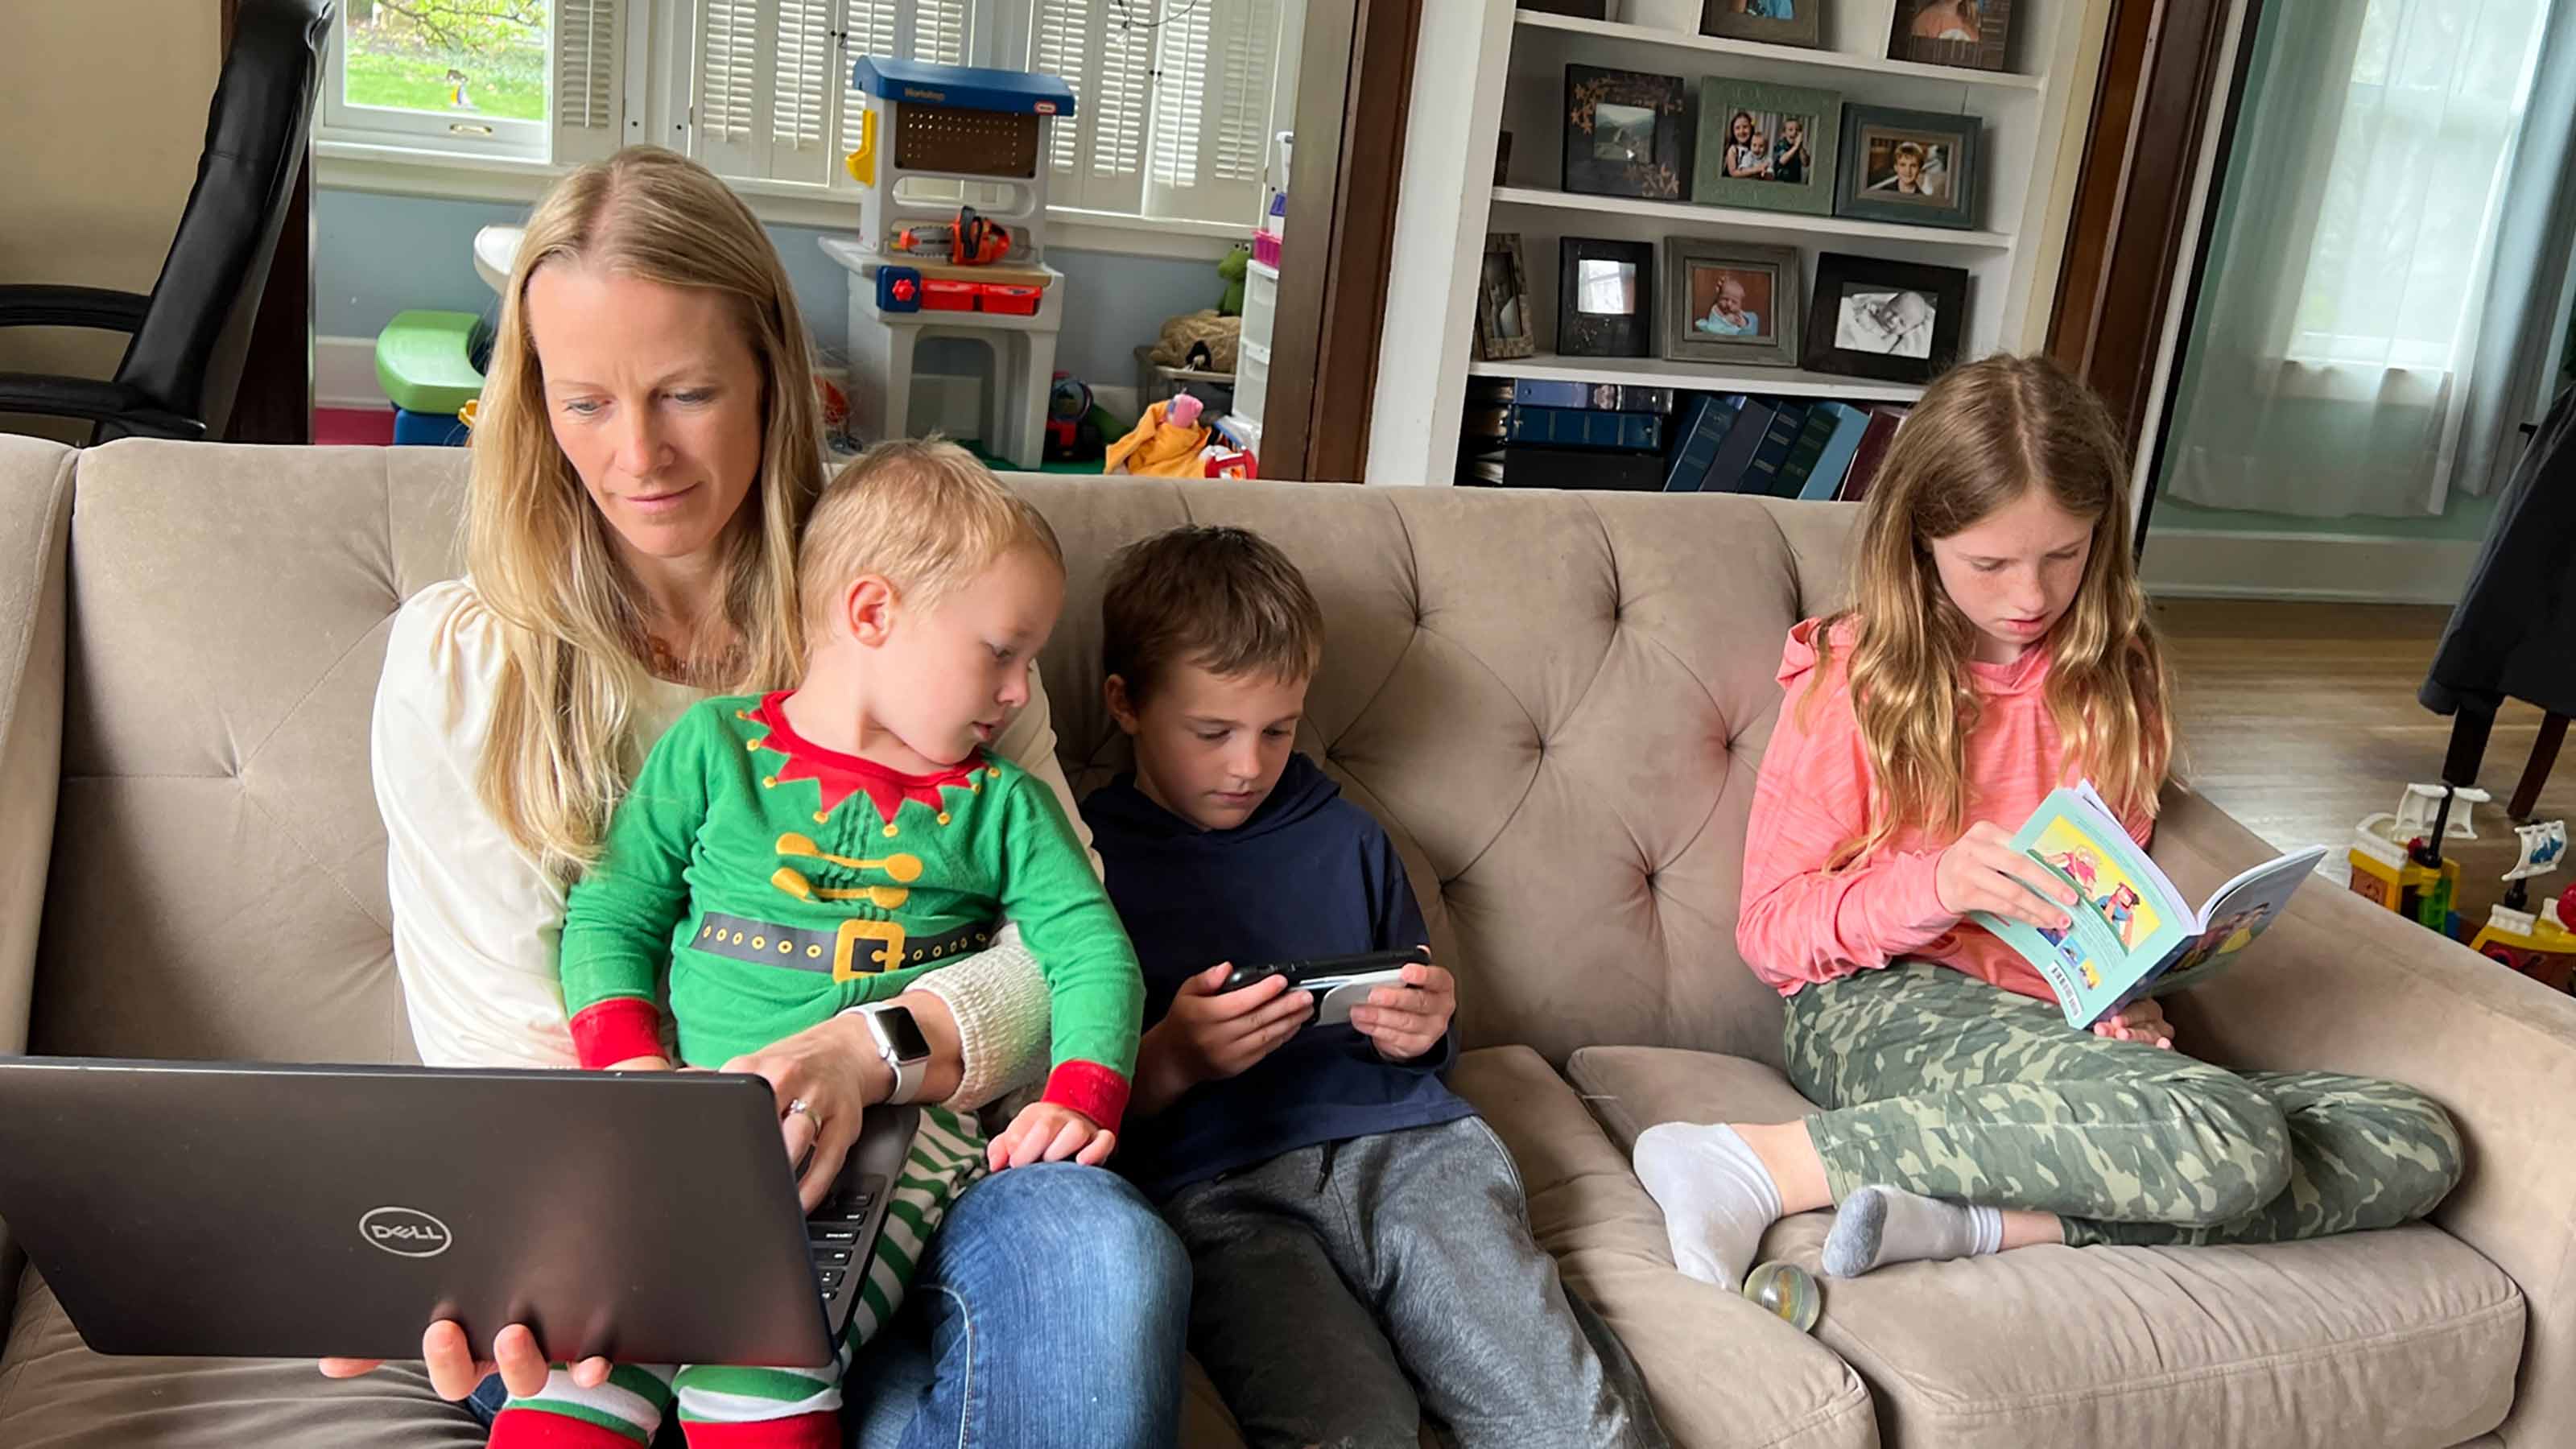 Mother trying to work on a laptop with her three kids on a couch